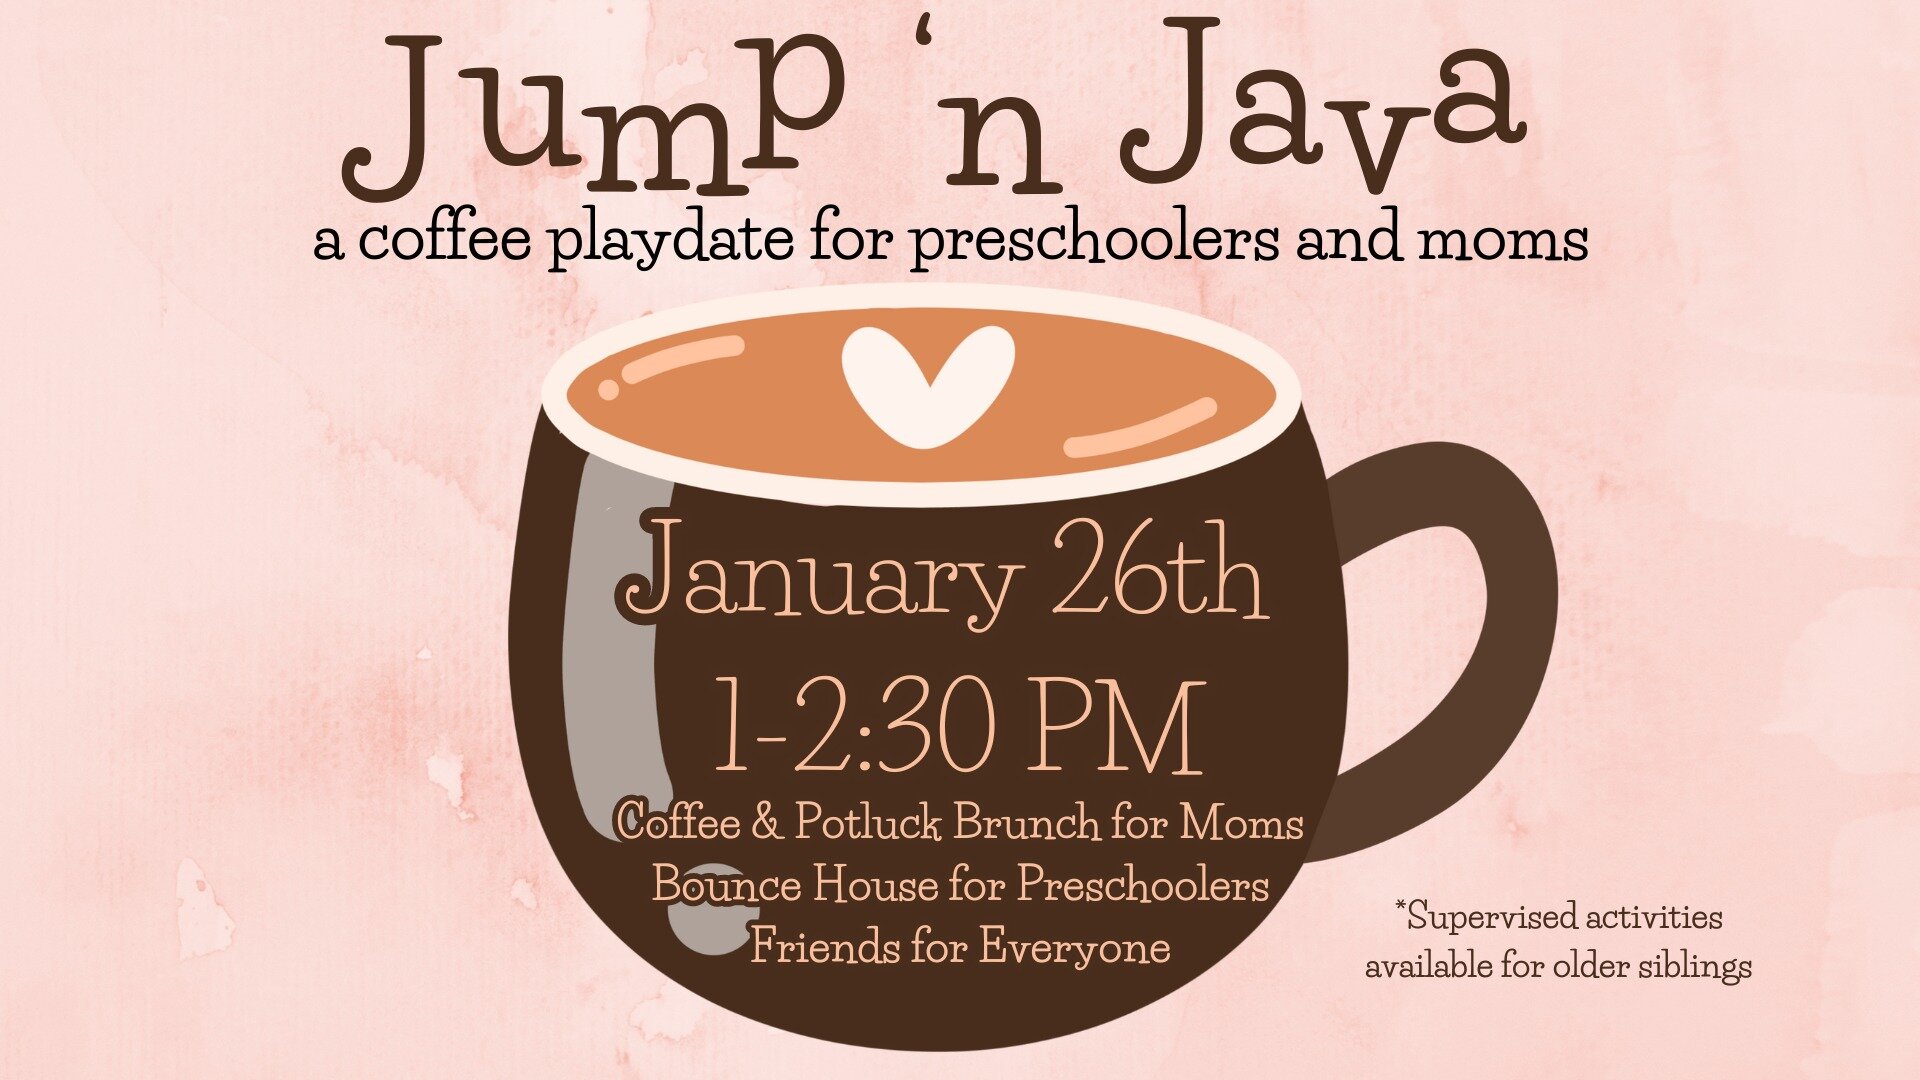 Our next Jump 'n Java is Friday, January 26th @ 1-2:30 PM in the MPR! Moms with preschoolers are invited to a casual, fun potluck brunch and coffee bar while the little ones burn off some energy in the bounce house and crawling tunnels!  Supervised a